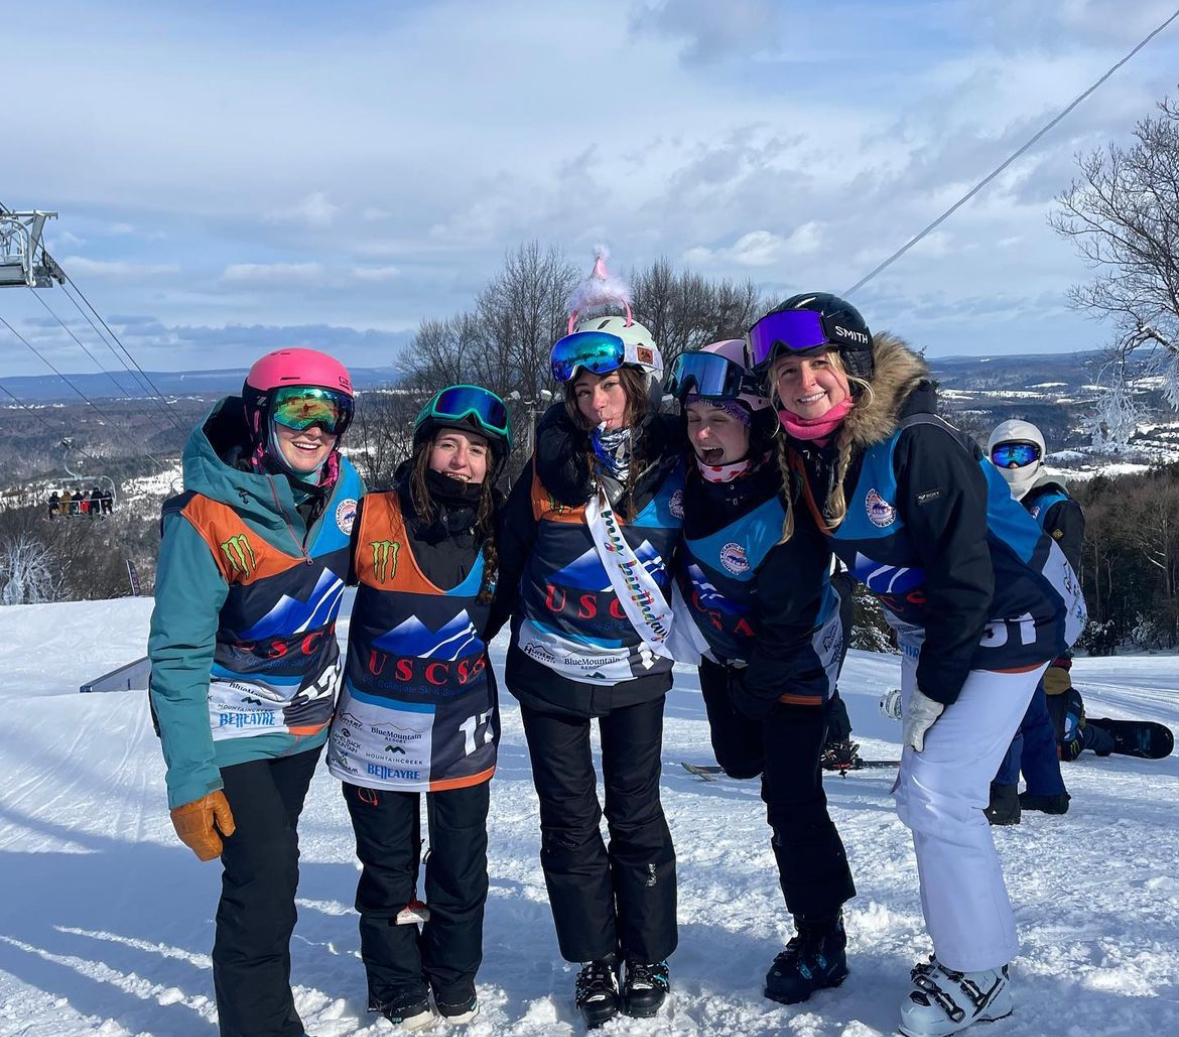 The ski and board team looks to continue its impressive run at regionals. (Photo courtesy of @lafskiandboard on Instagram)